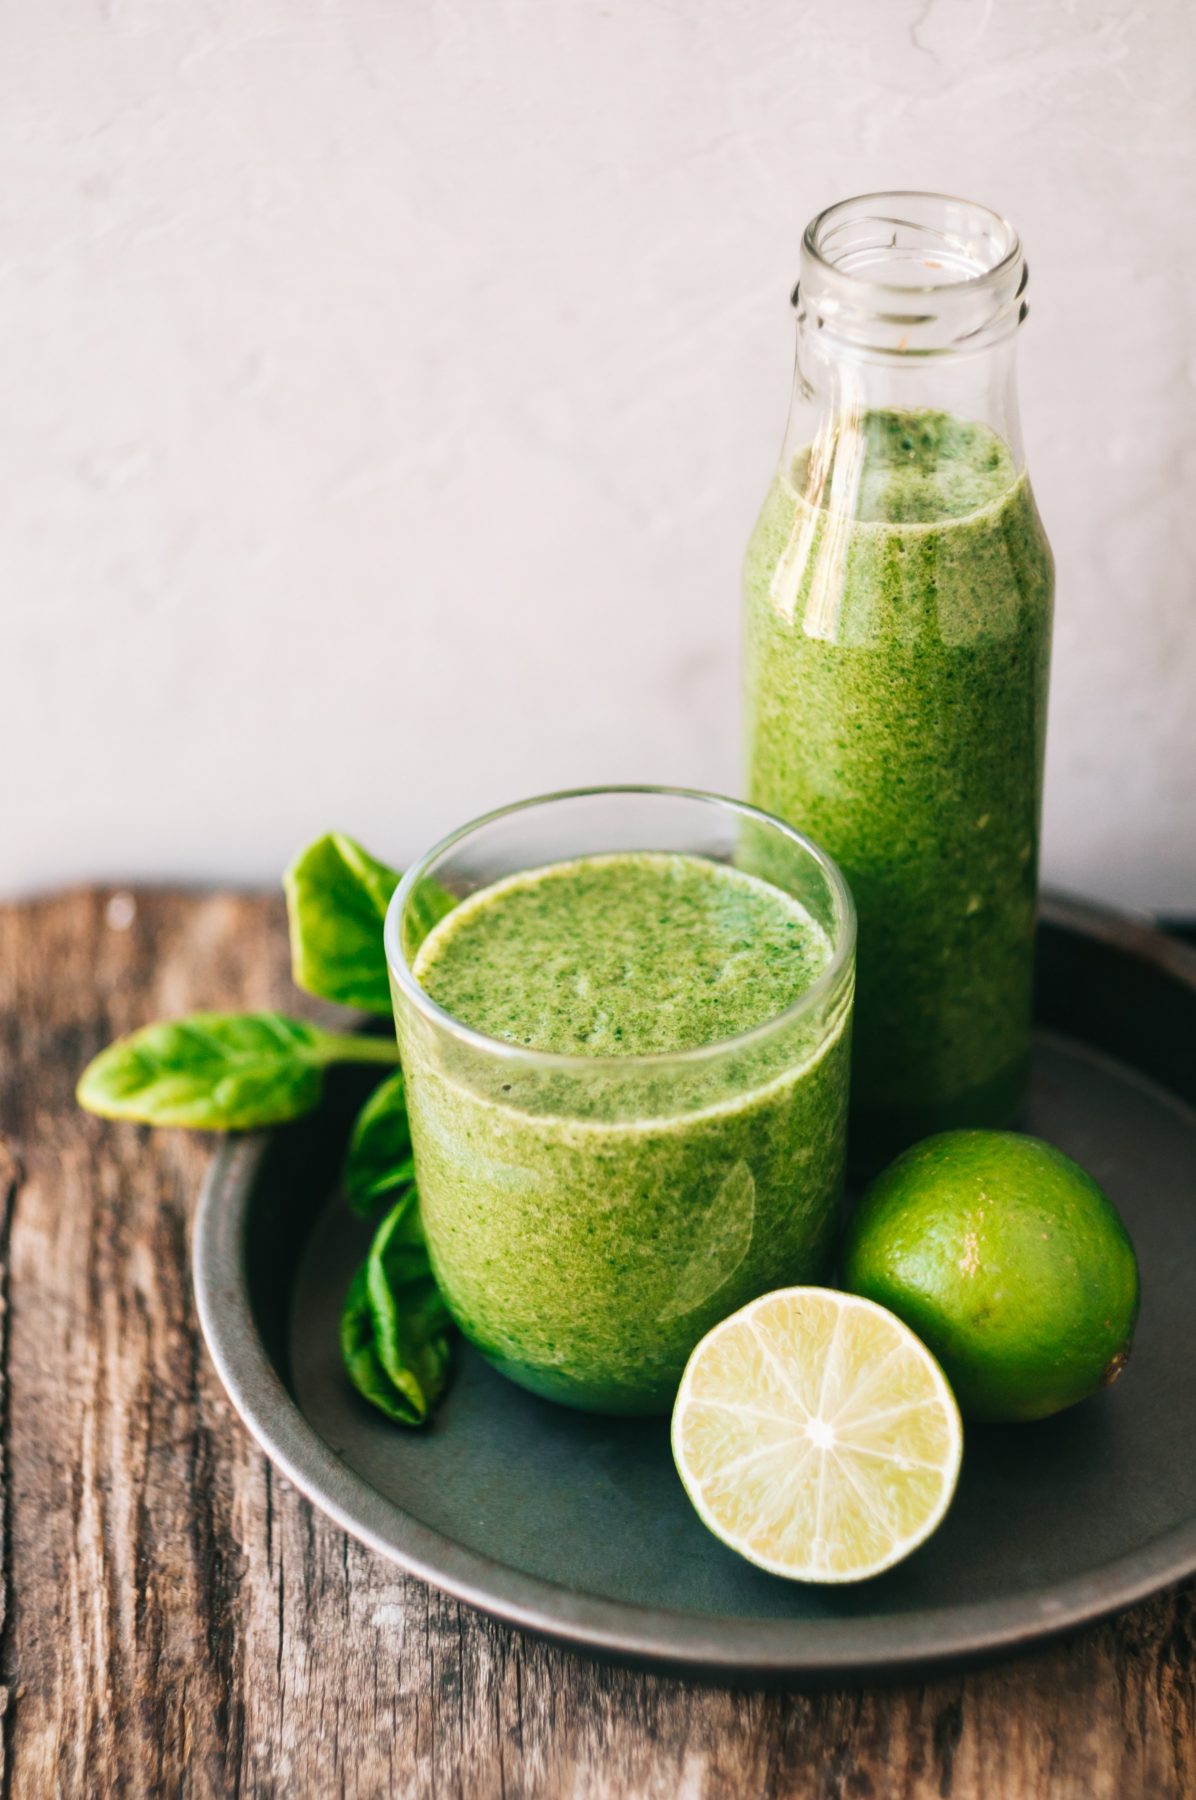 Green detox smoothie in glass and bottle and tray with limes